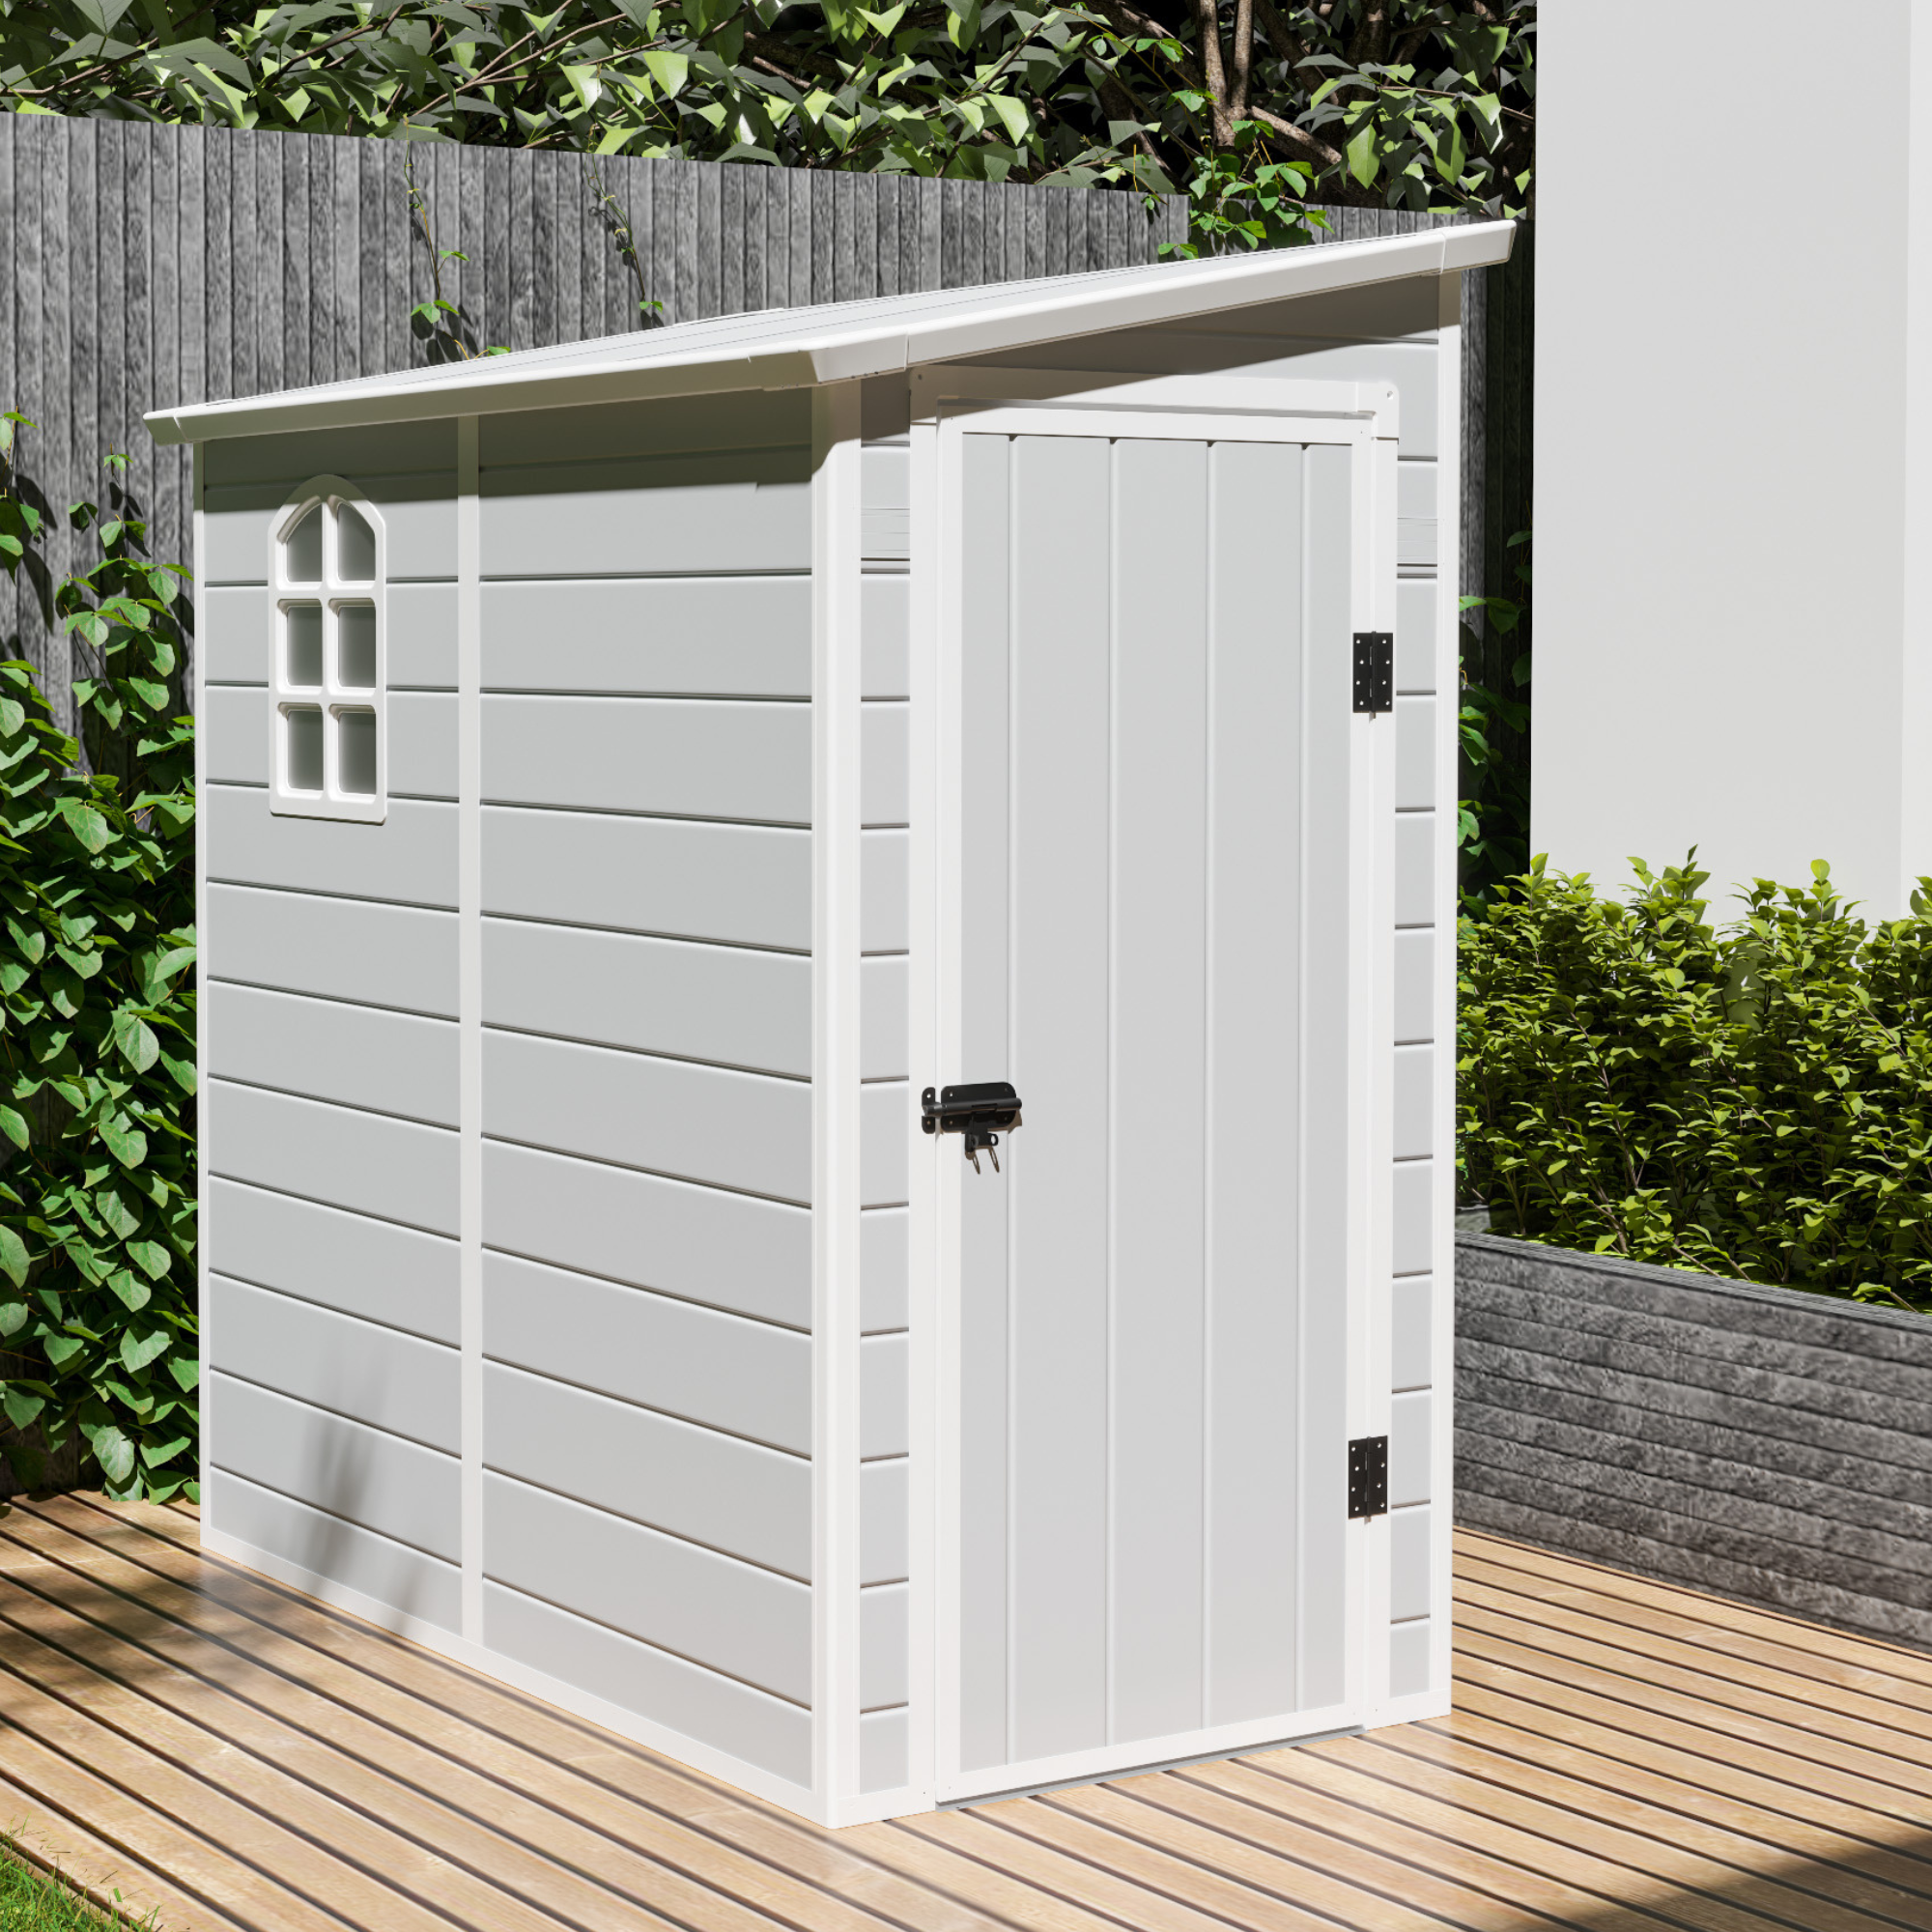 Jasmine Lean-To Pent Plastic Shed Light Grey - 4x6ft